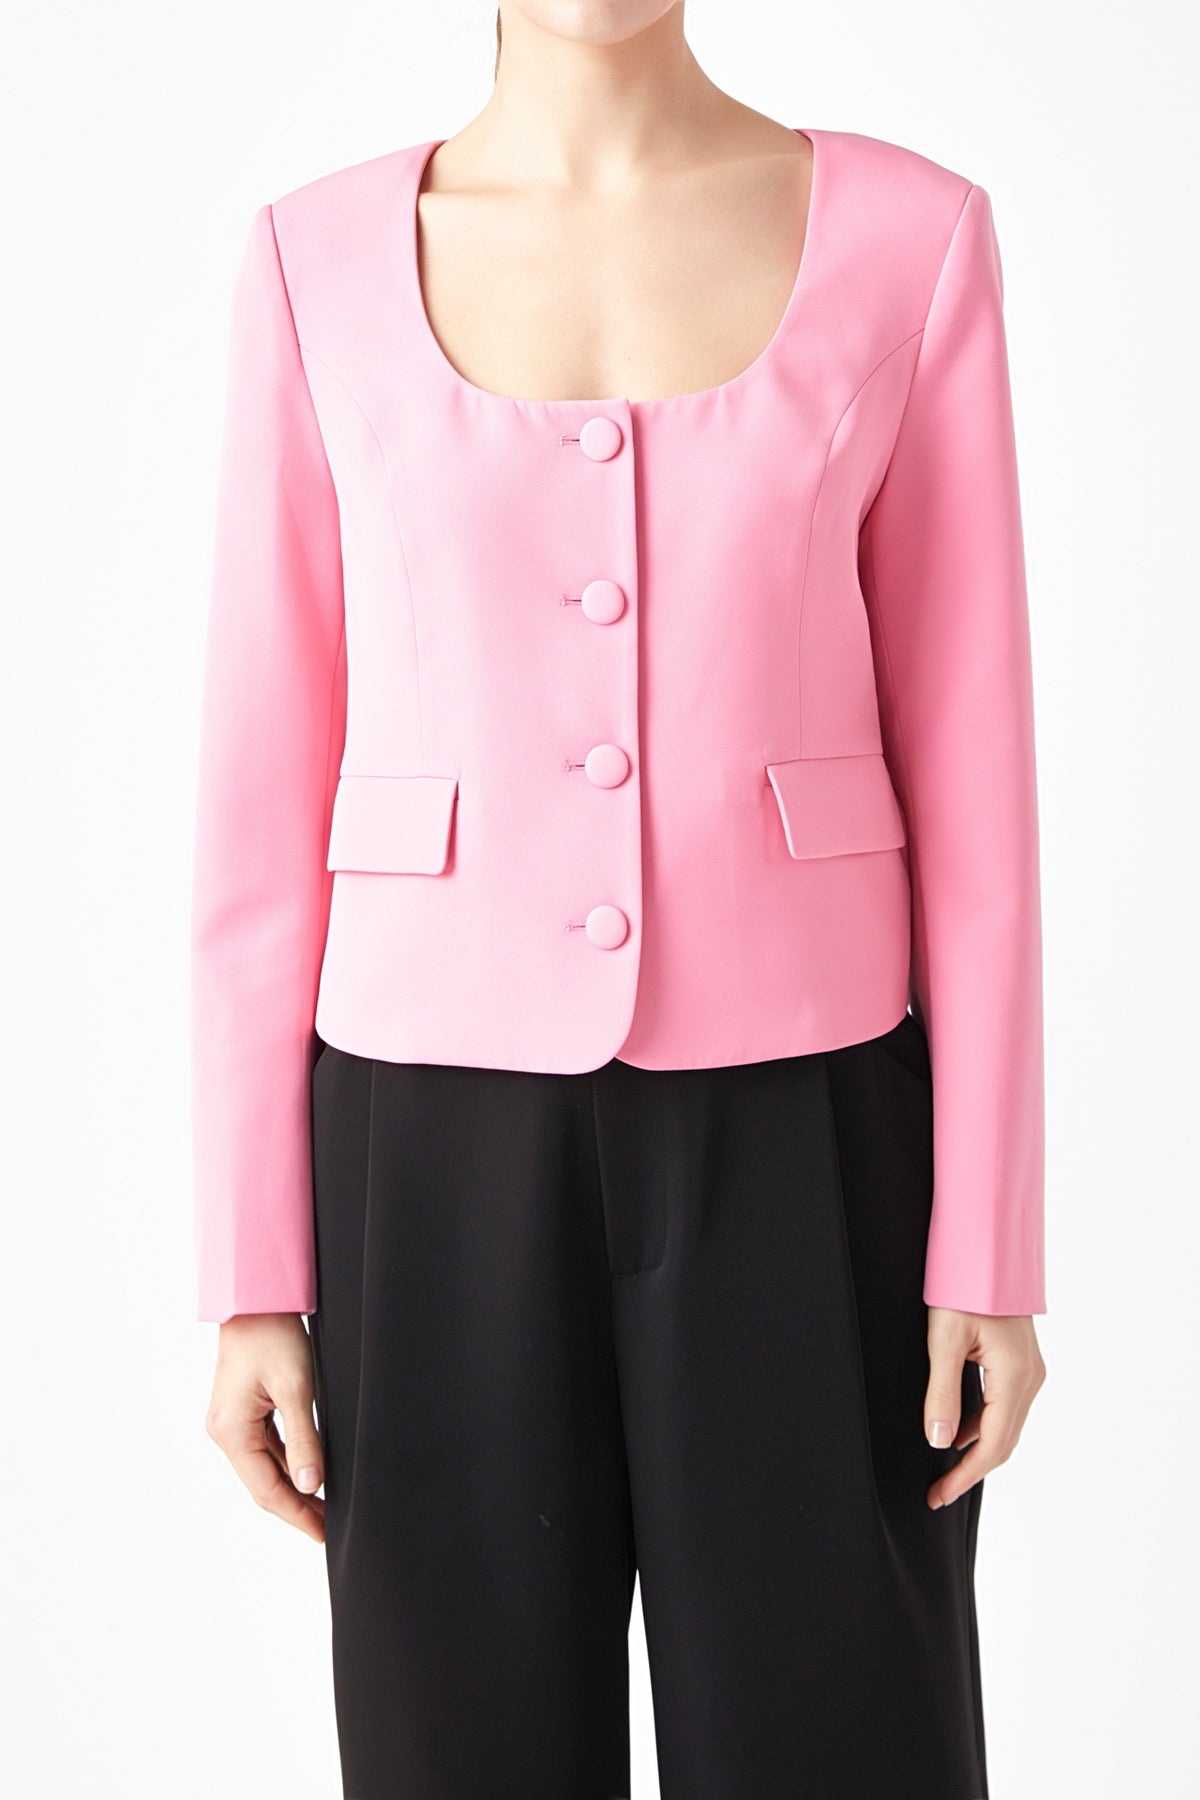 ENDLESS ROSE - Scooped U Buttoned Top - JACKETS available at Objectrare